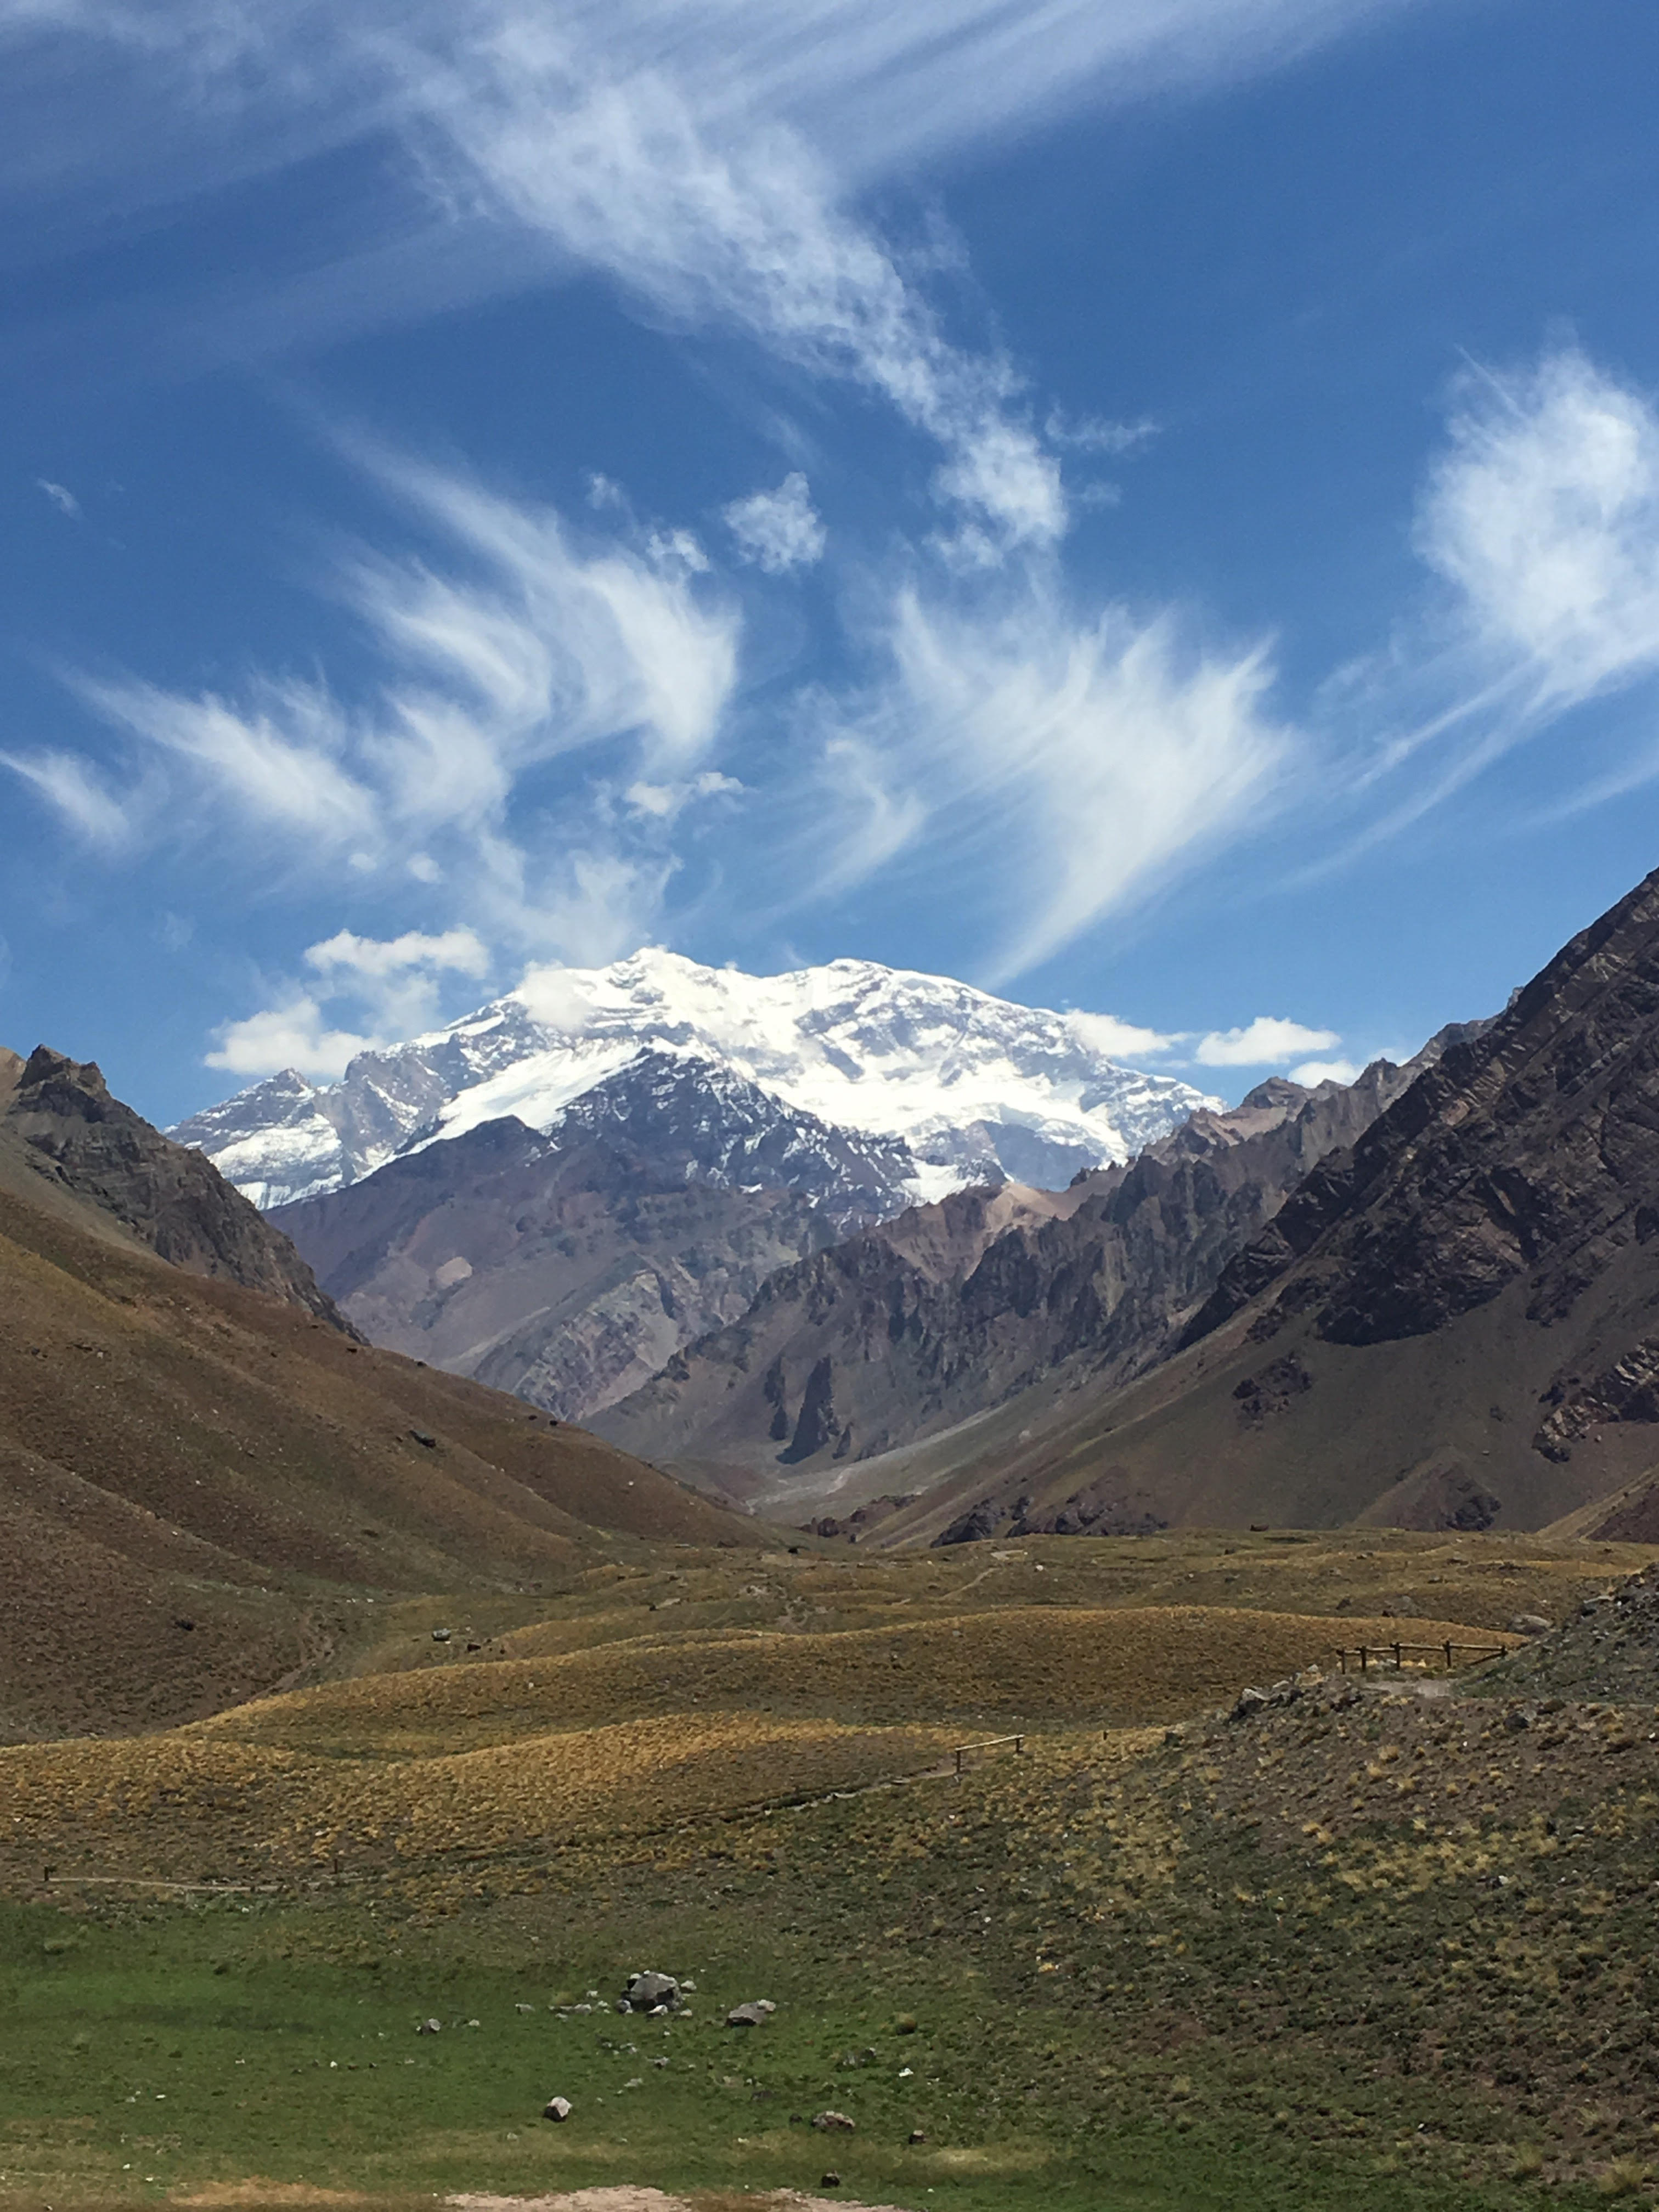 Argentina: Trekking Through the Andes | UD Abroad Blog